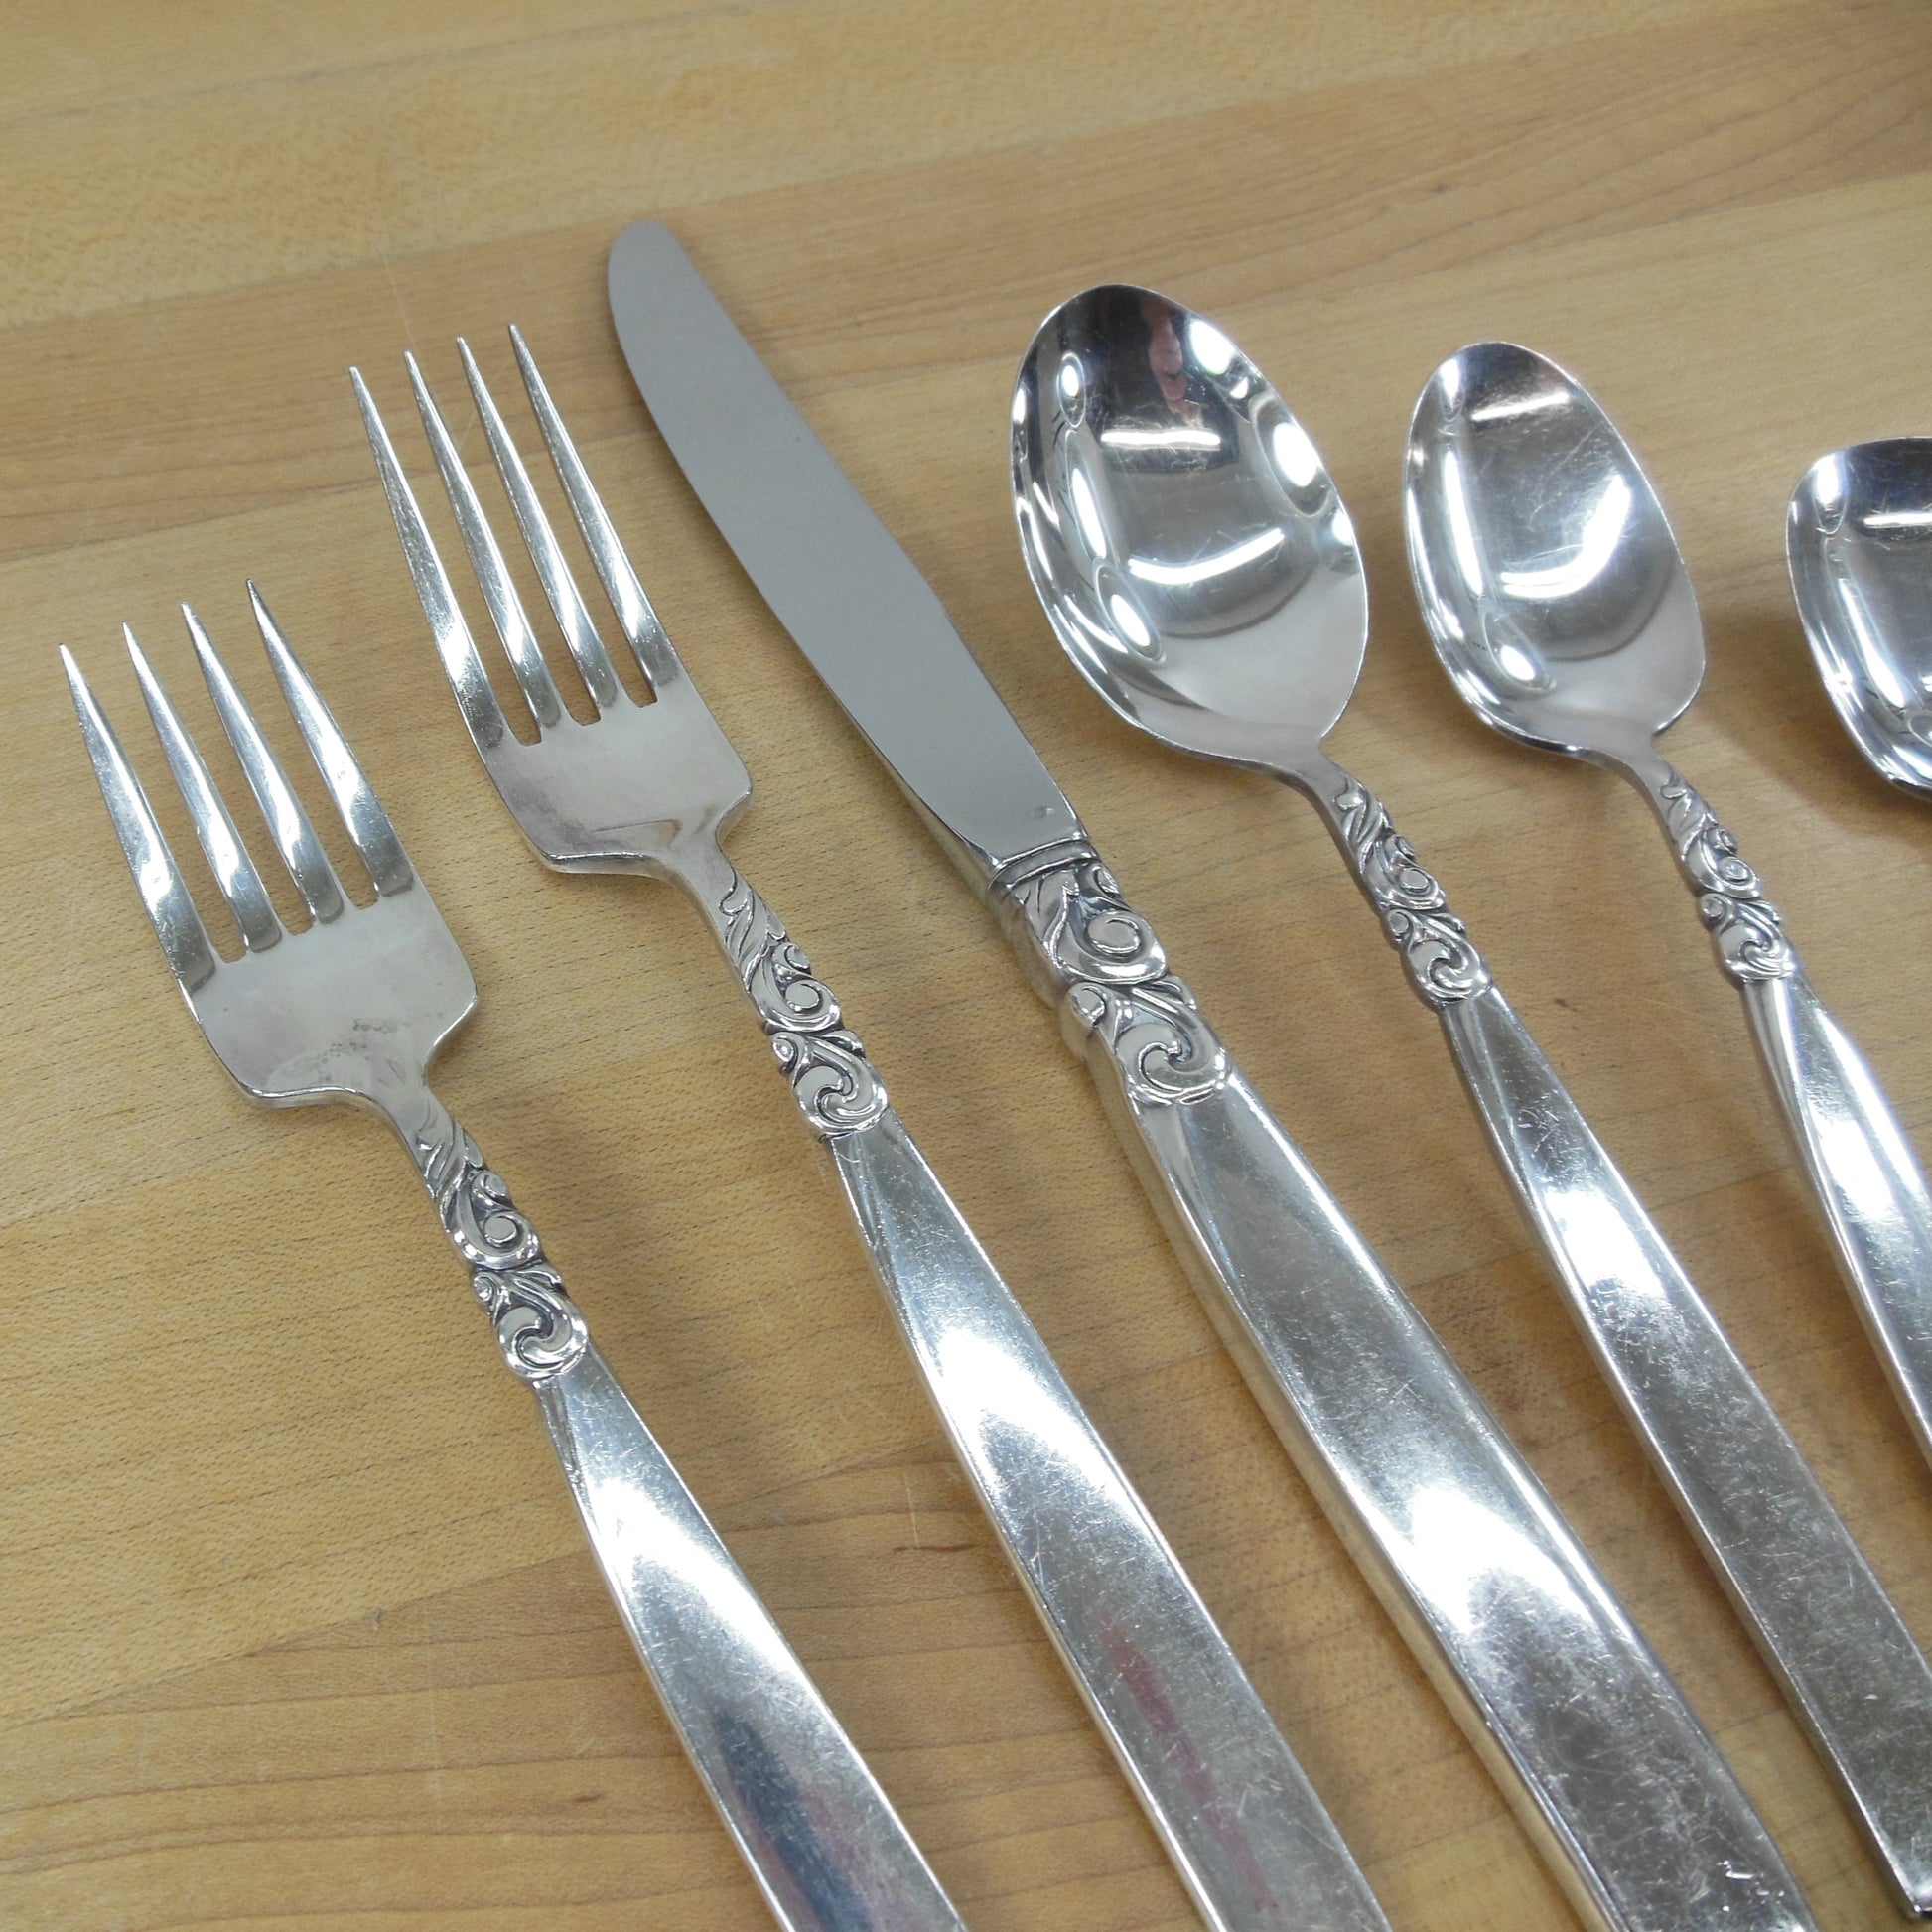 Oneida Community Silverplate South Seas Flatware Set For 8 - 50 Pieces used